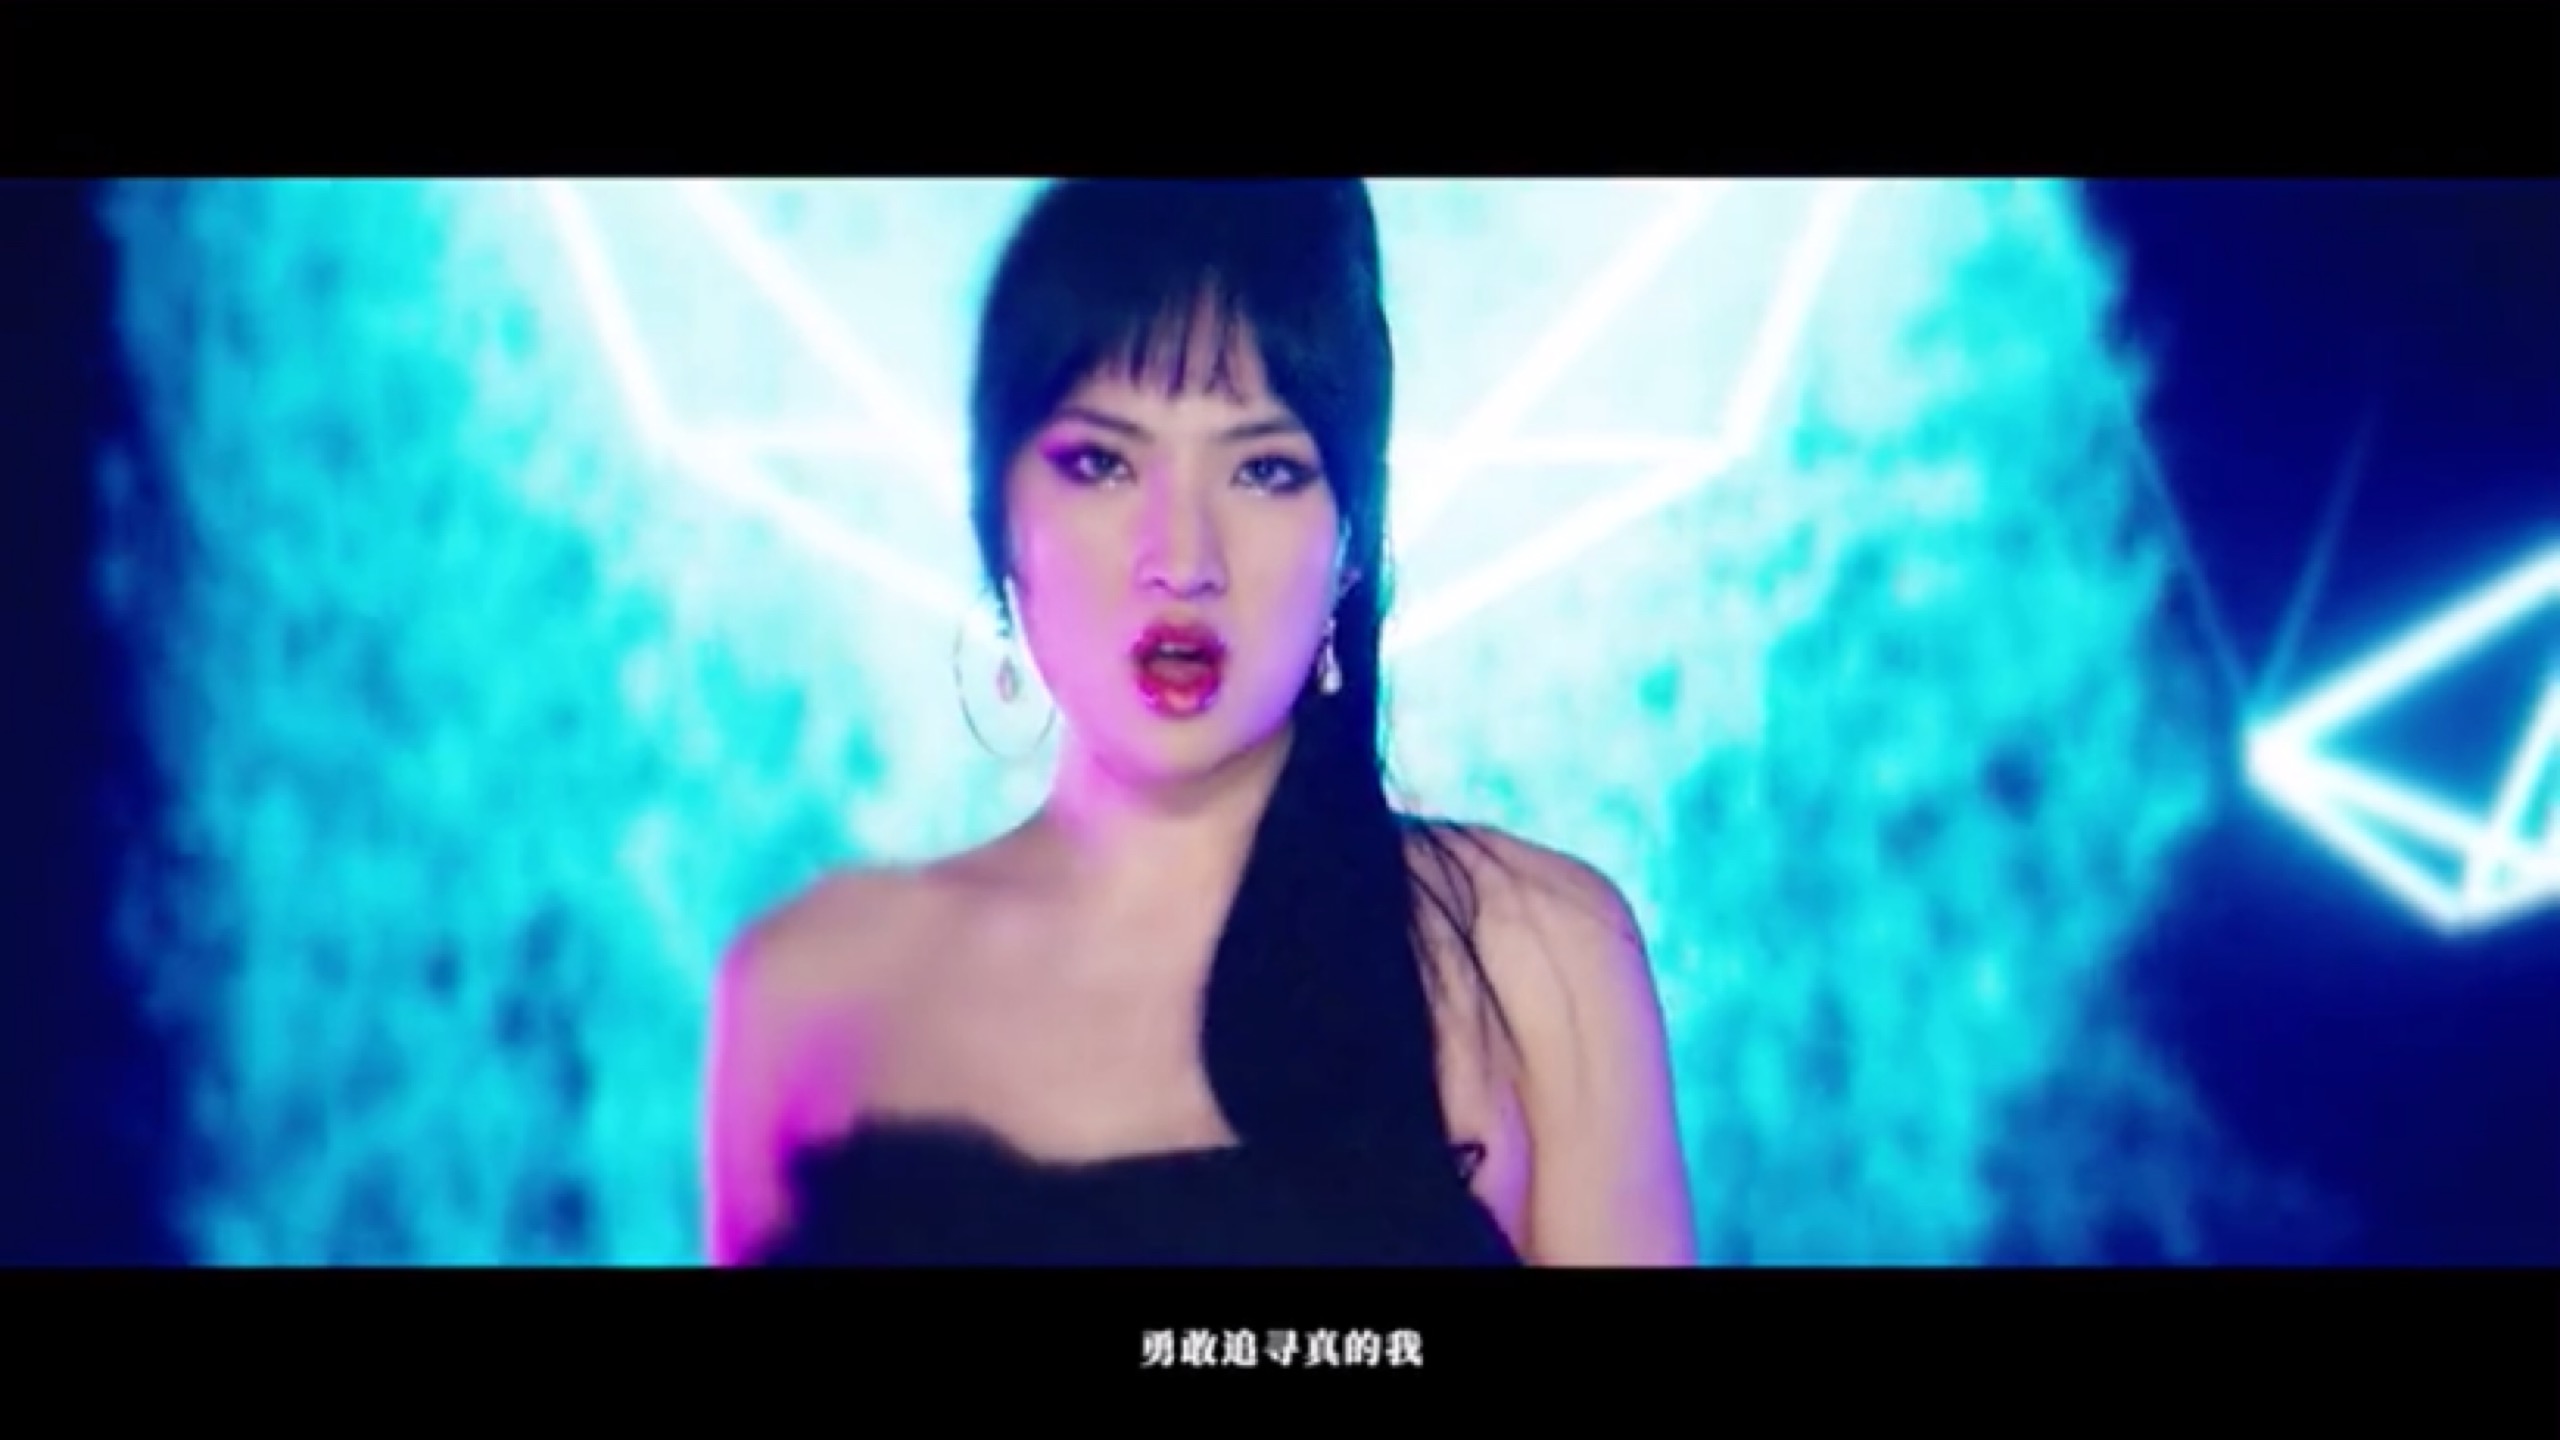 Singer debut’Huawei Princess’ first song released…  “Hobbies would have been nice”